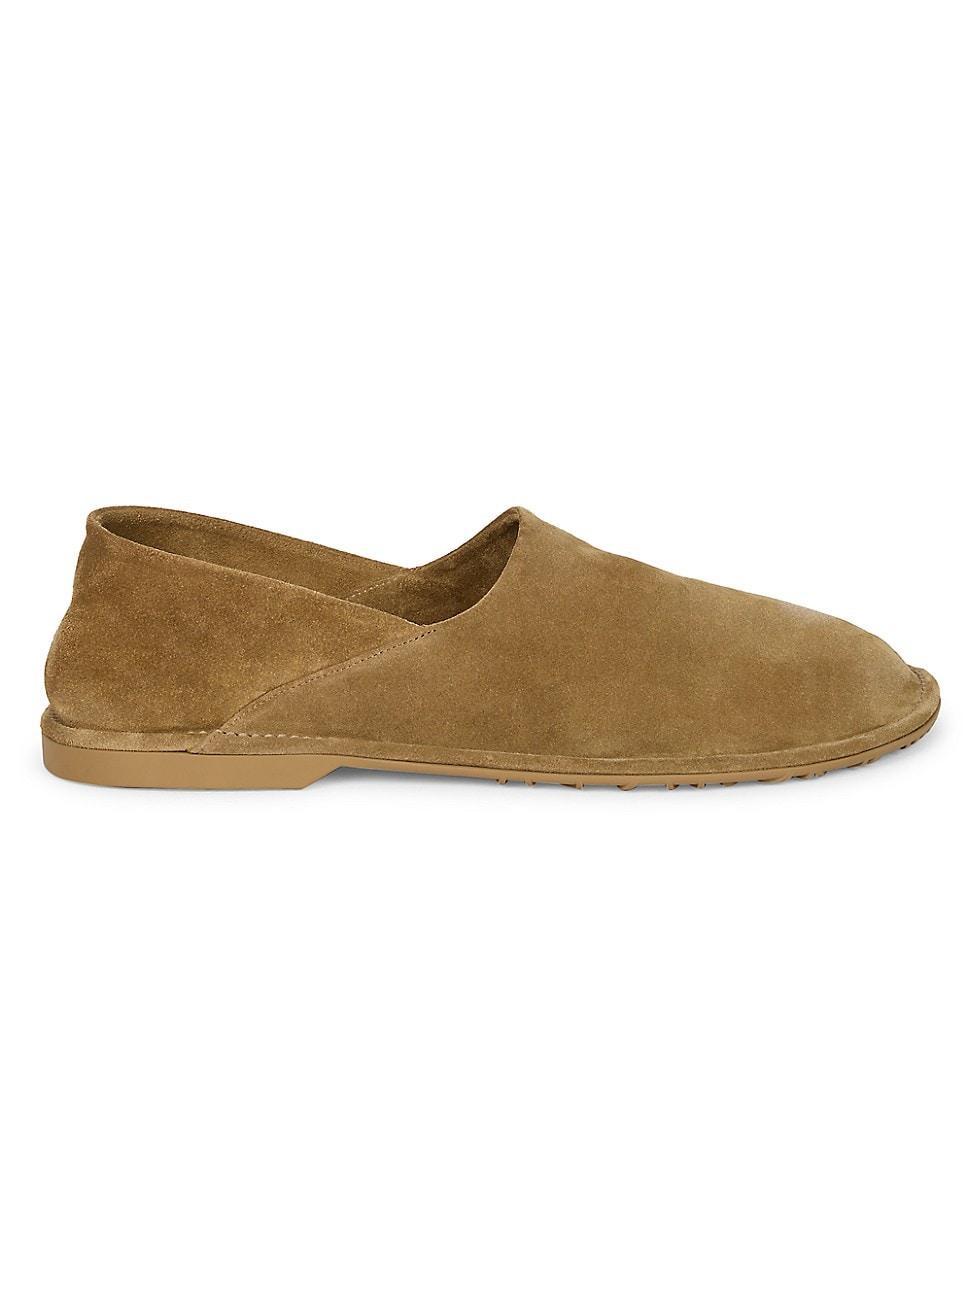 Mens Folio Suede Slippers Product Image